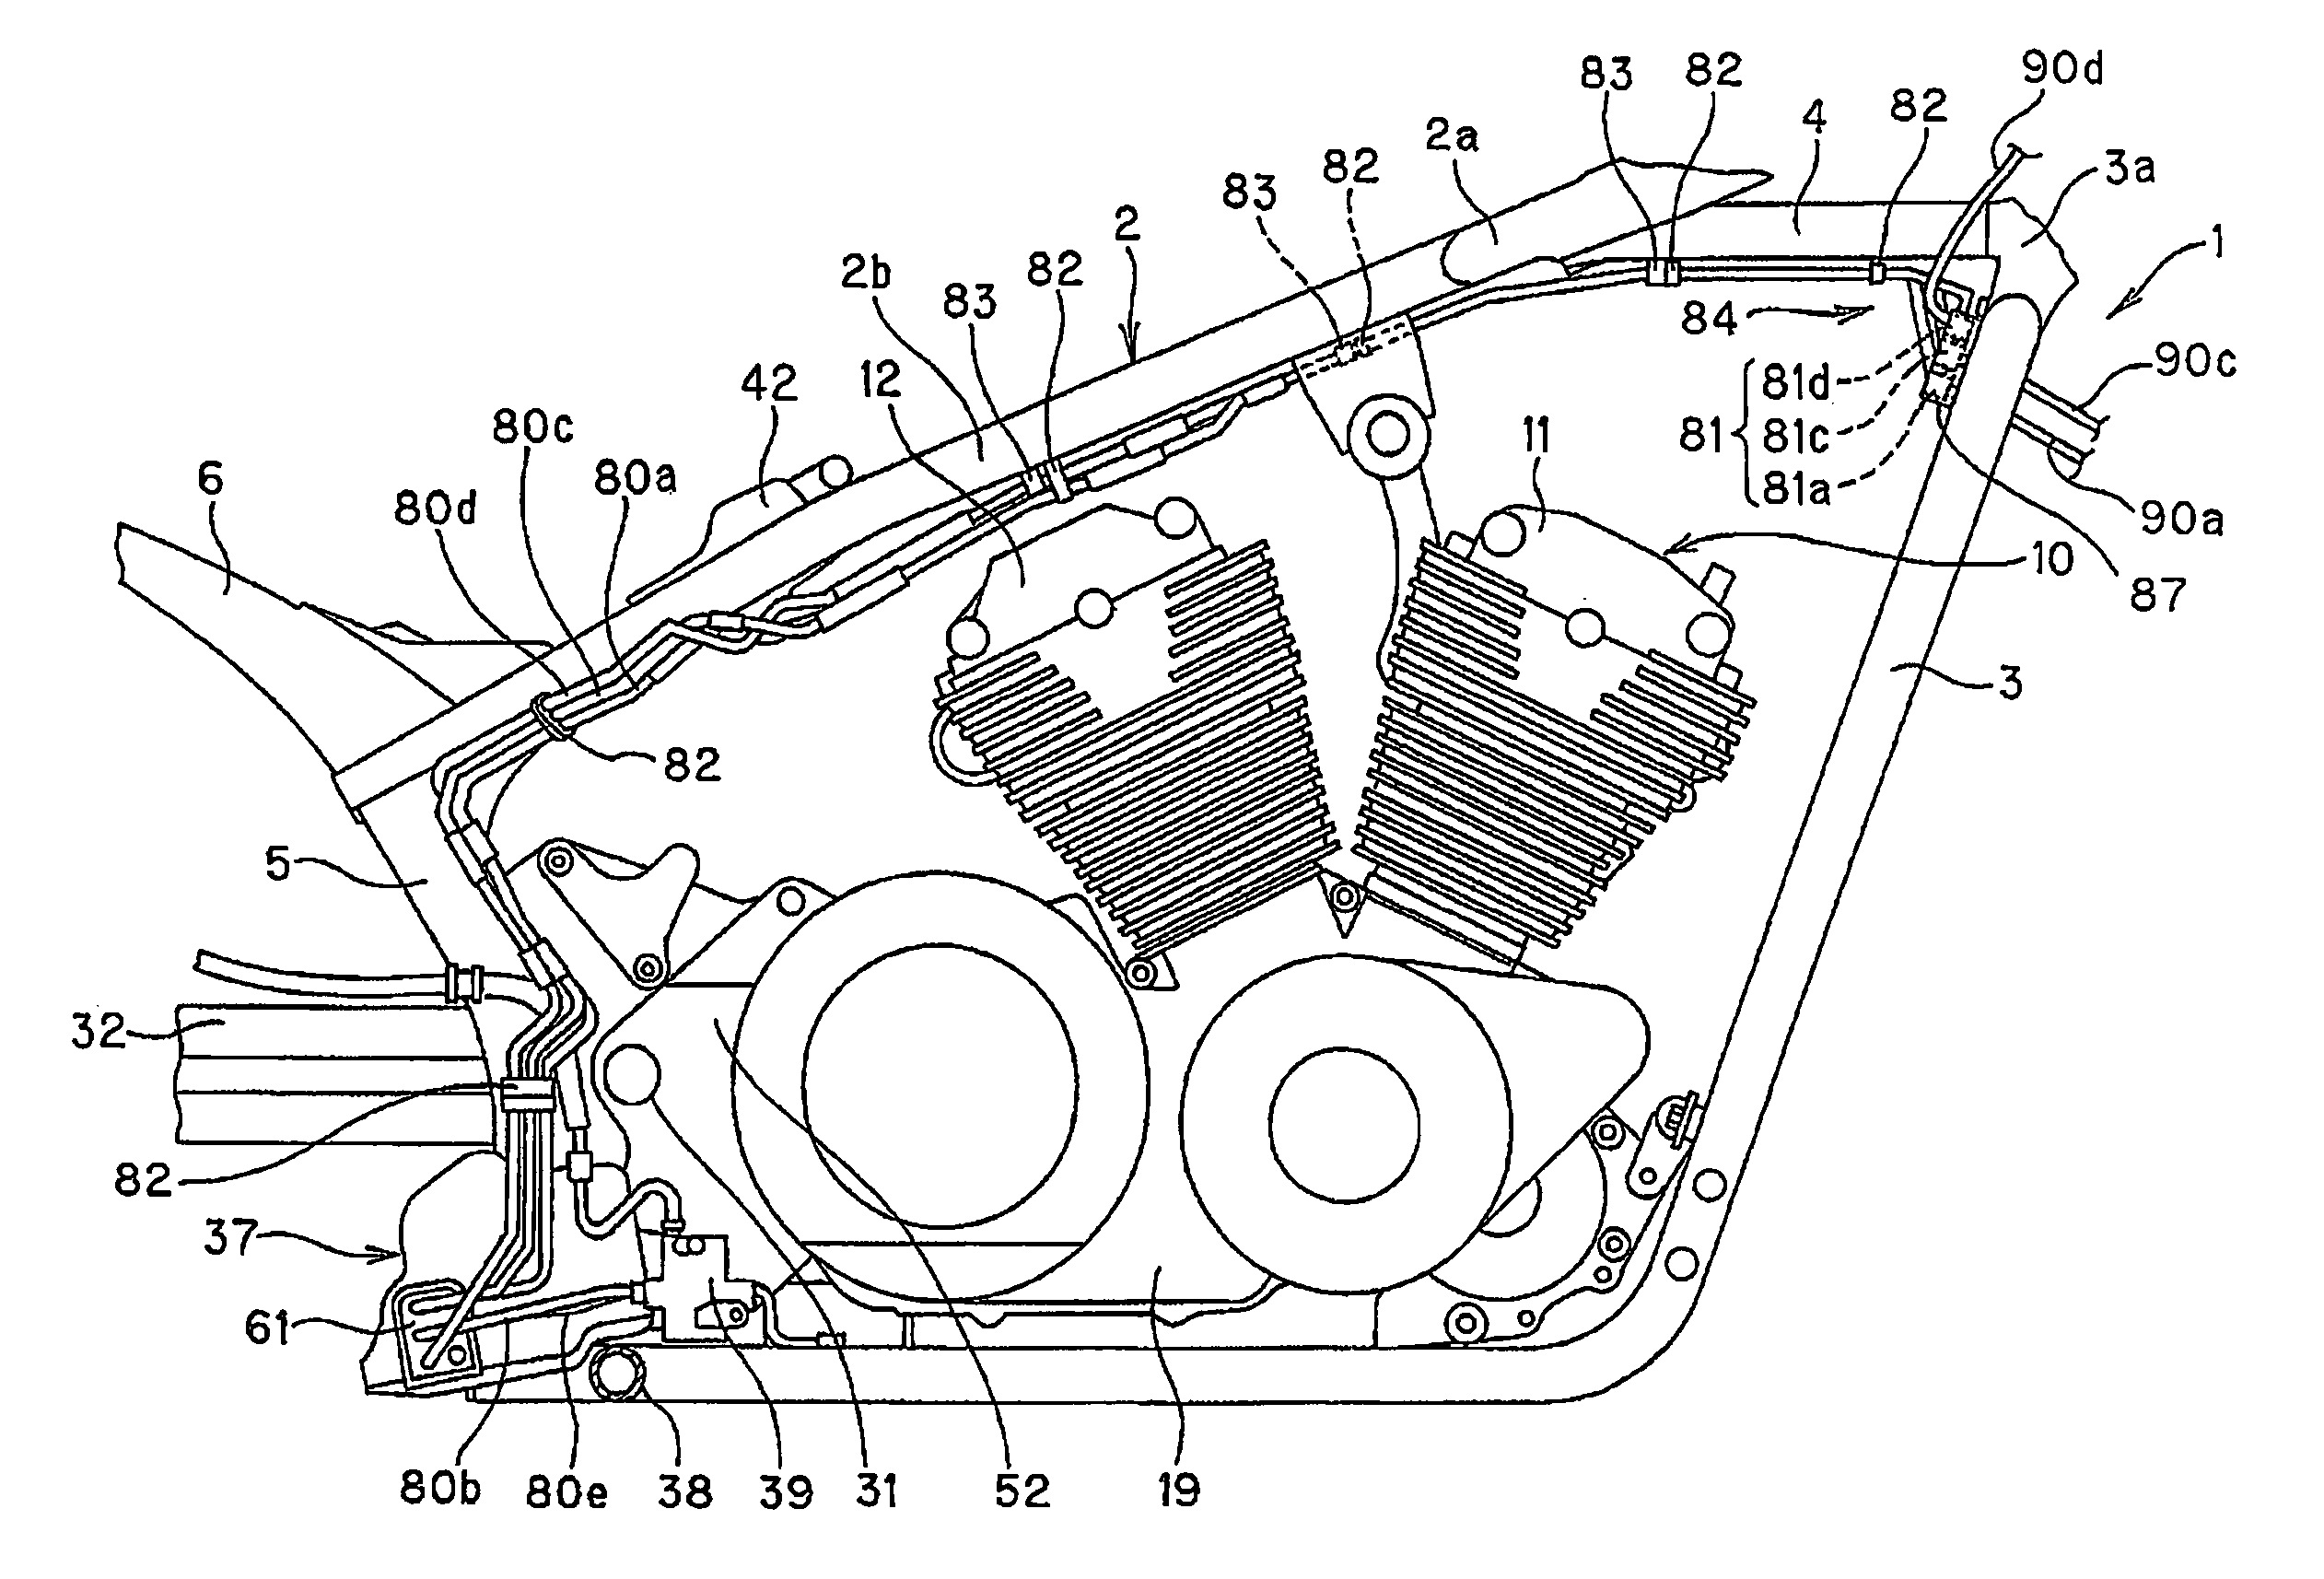 Motorcycle including antilock brake system and brake fluid conduit routing structure